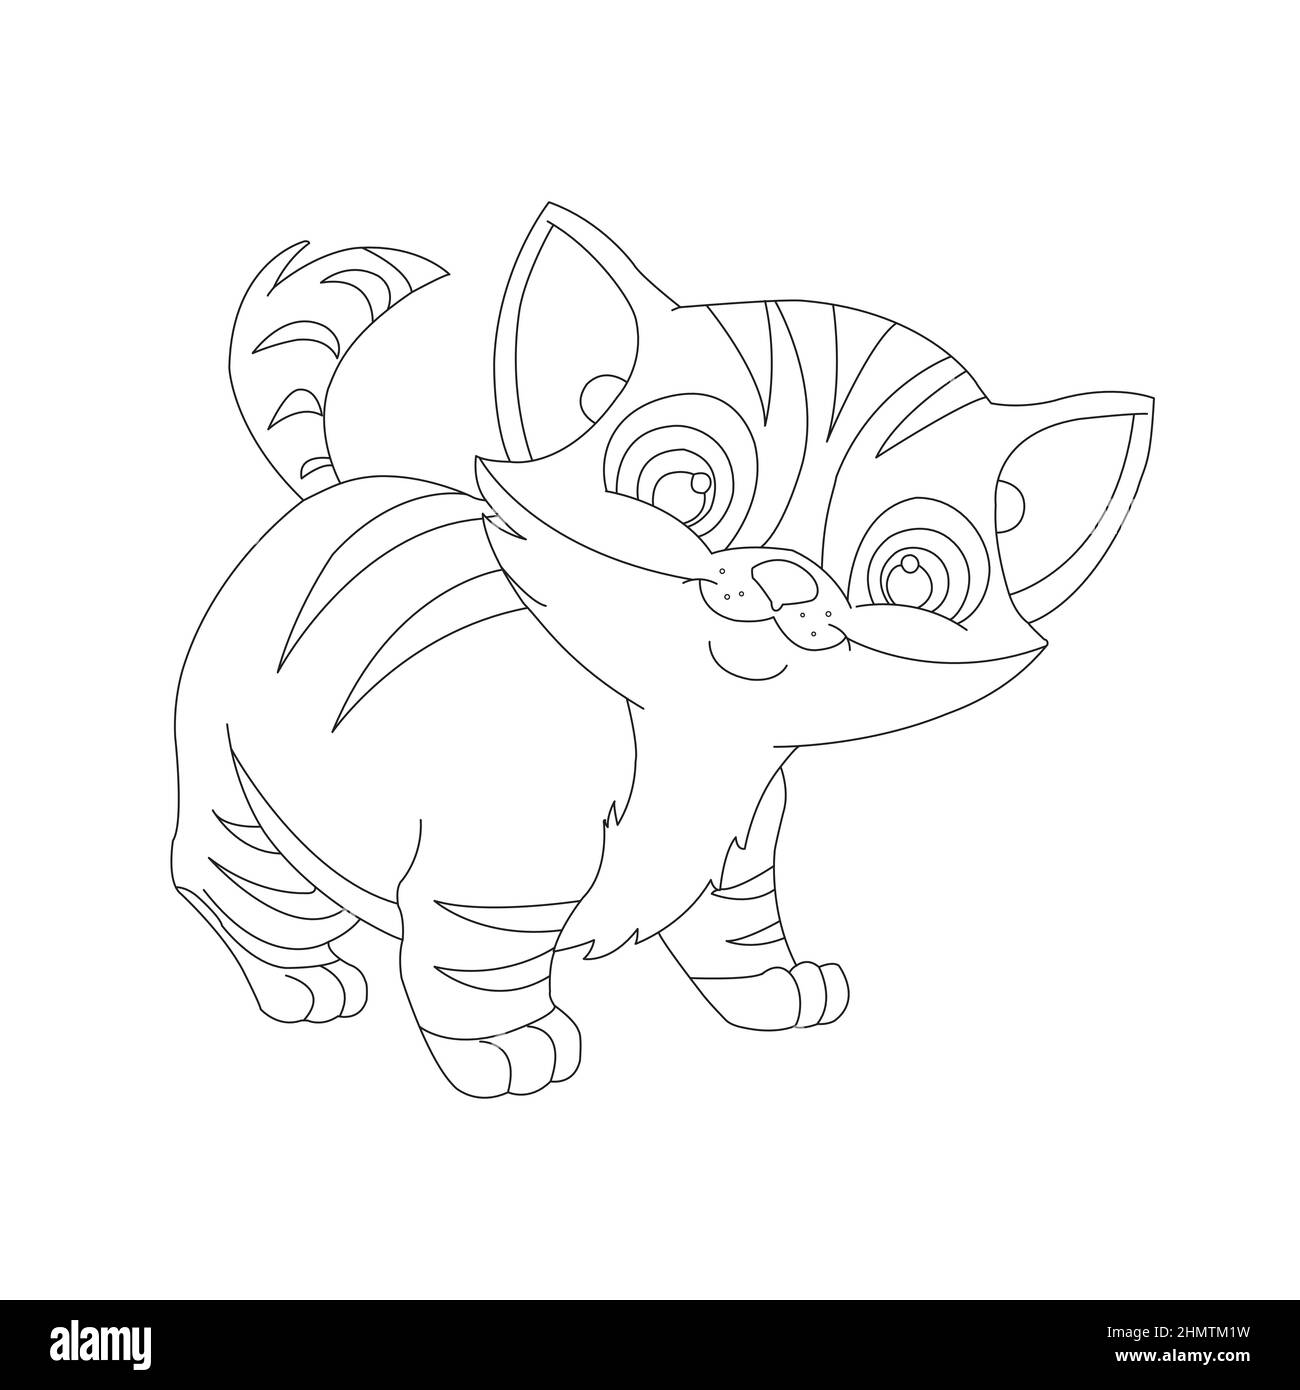 Anime Alice in Wonderland With Cheshire Cat Coloring Page  Etsy Israel